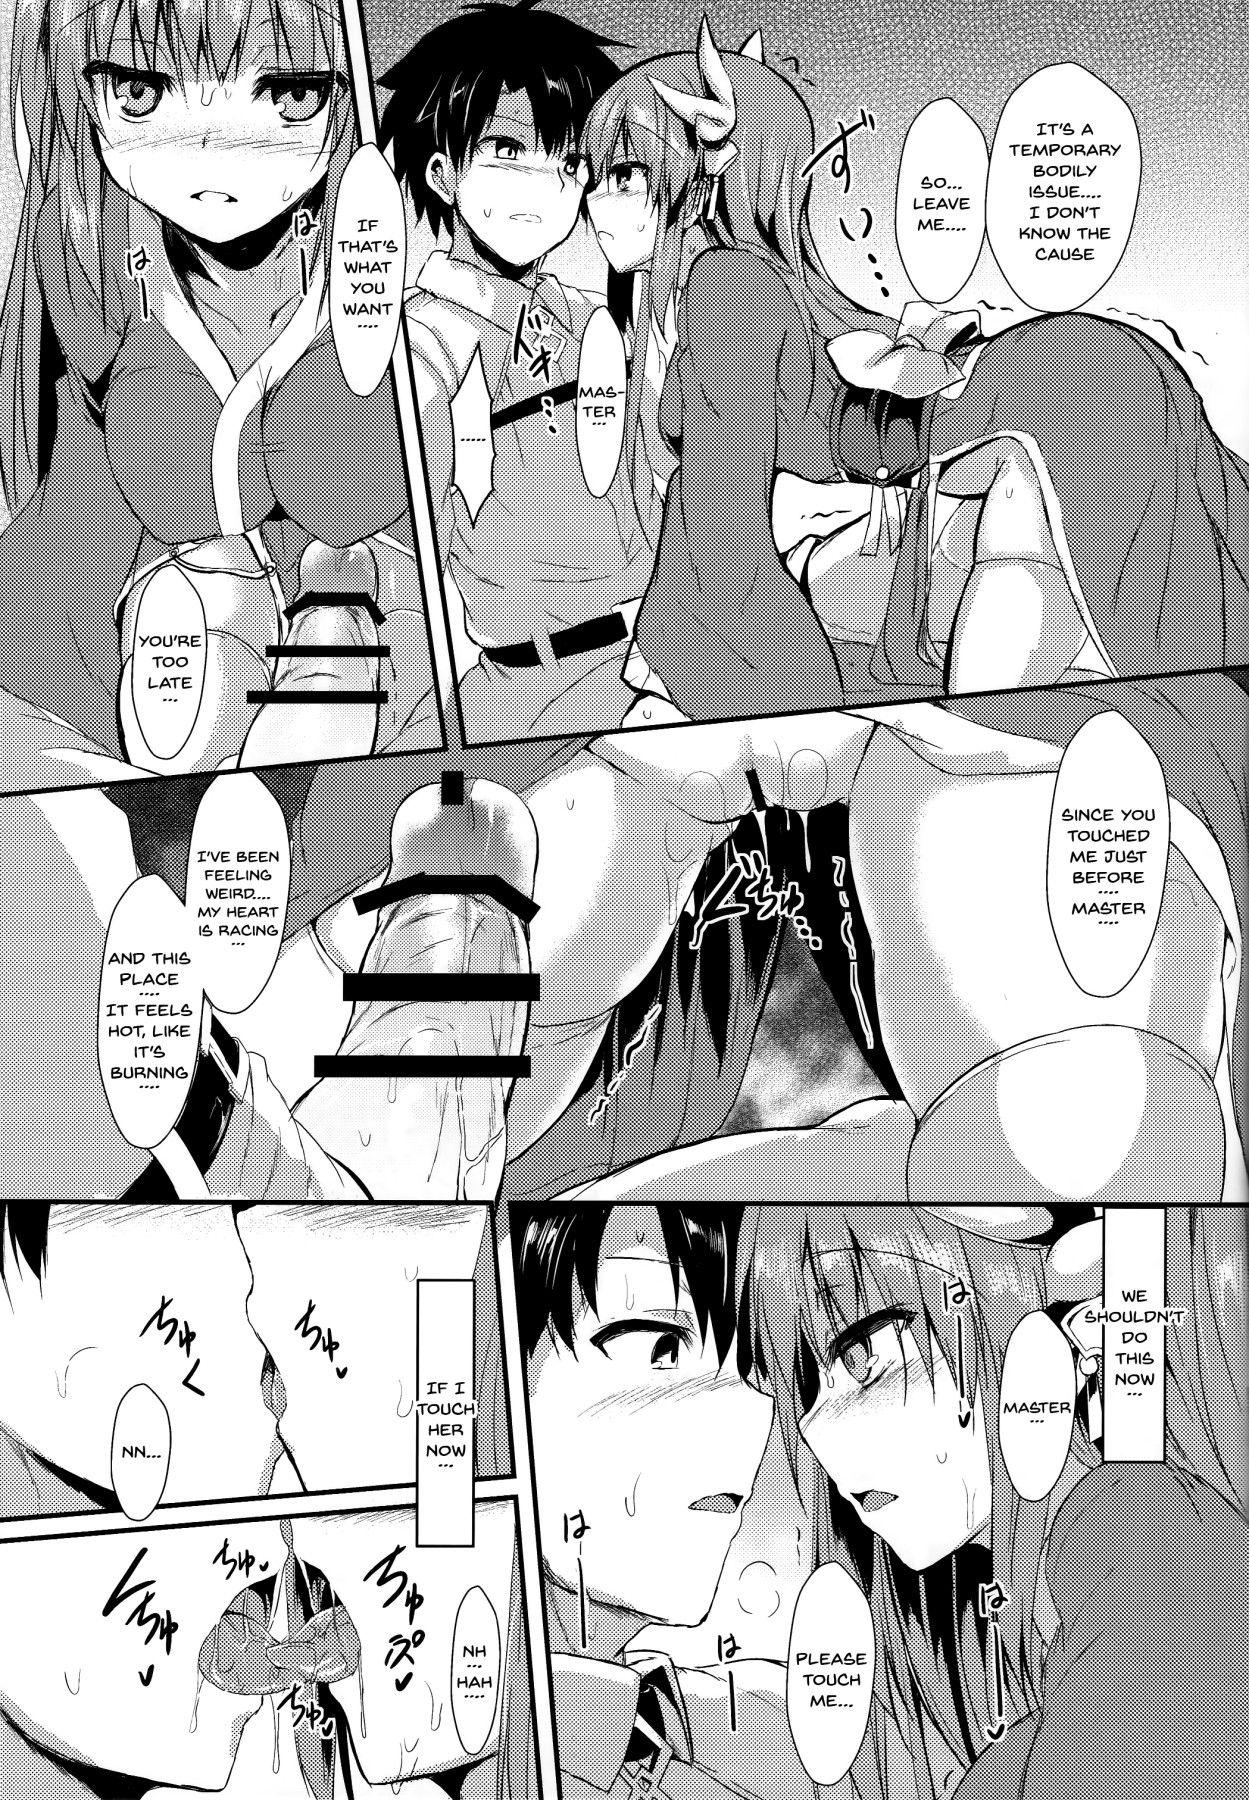 Young Old (C93) [ASTRONOMY (SeN)] Kiyohii no Hon (Yon) | Kiyohii's Book (Four) (Fate/Grand Order) [English] {Doujins.com} - Fate grand order Gets - Page 8